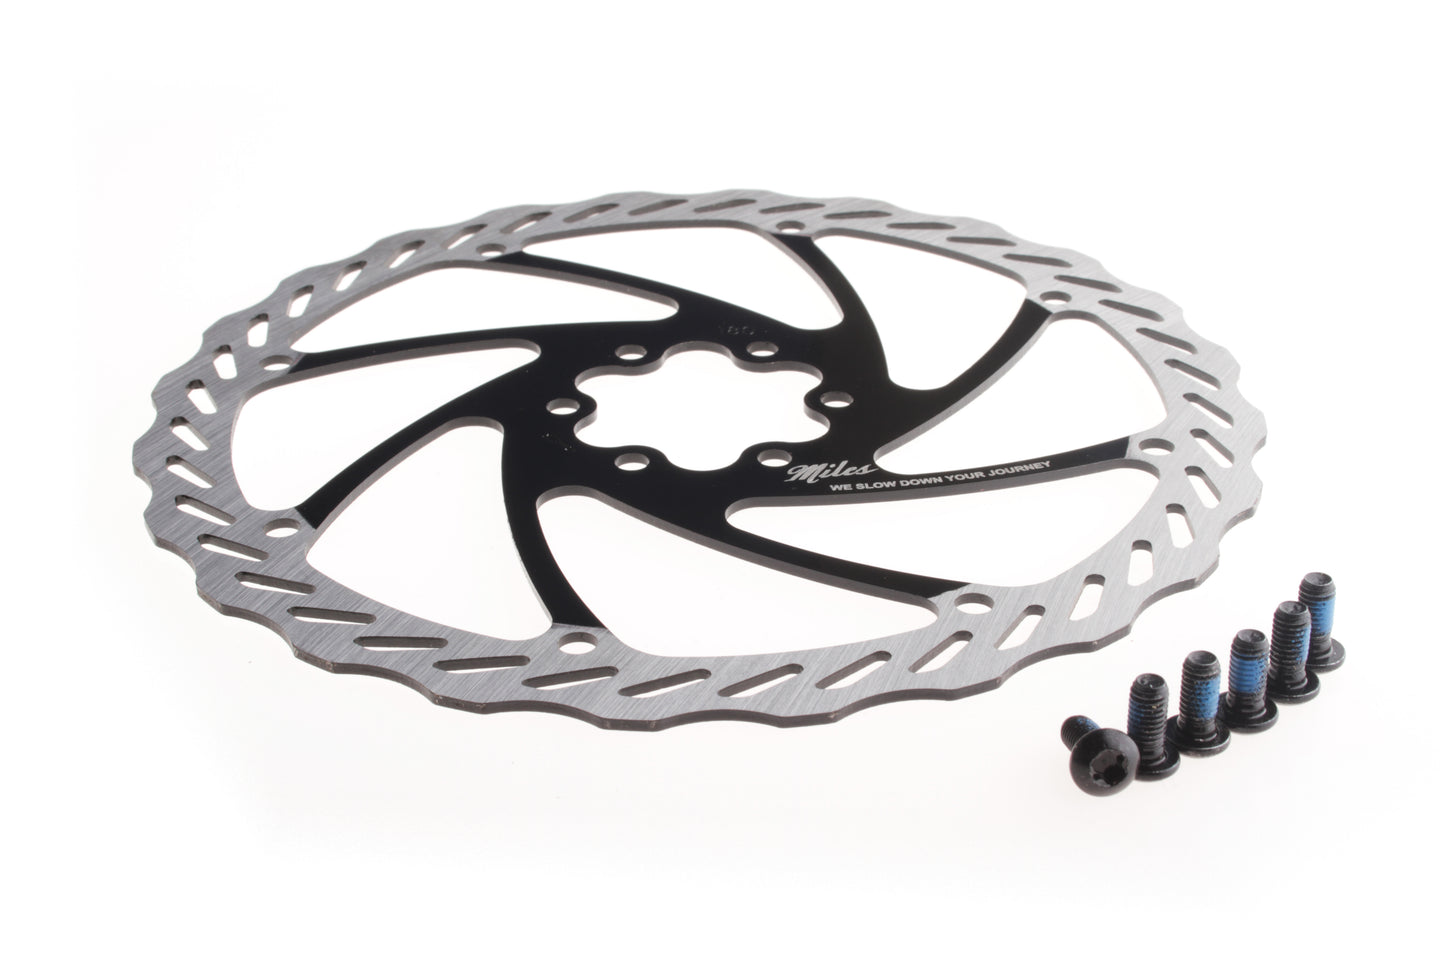 Miles SS3 Bicycle Disc Brake Rotor, with bolts - 160mm, 180mm, 203mm